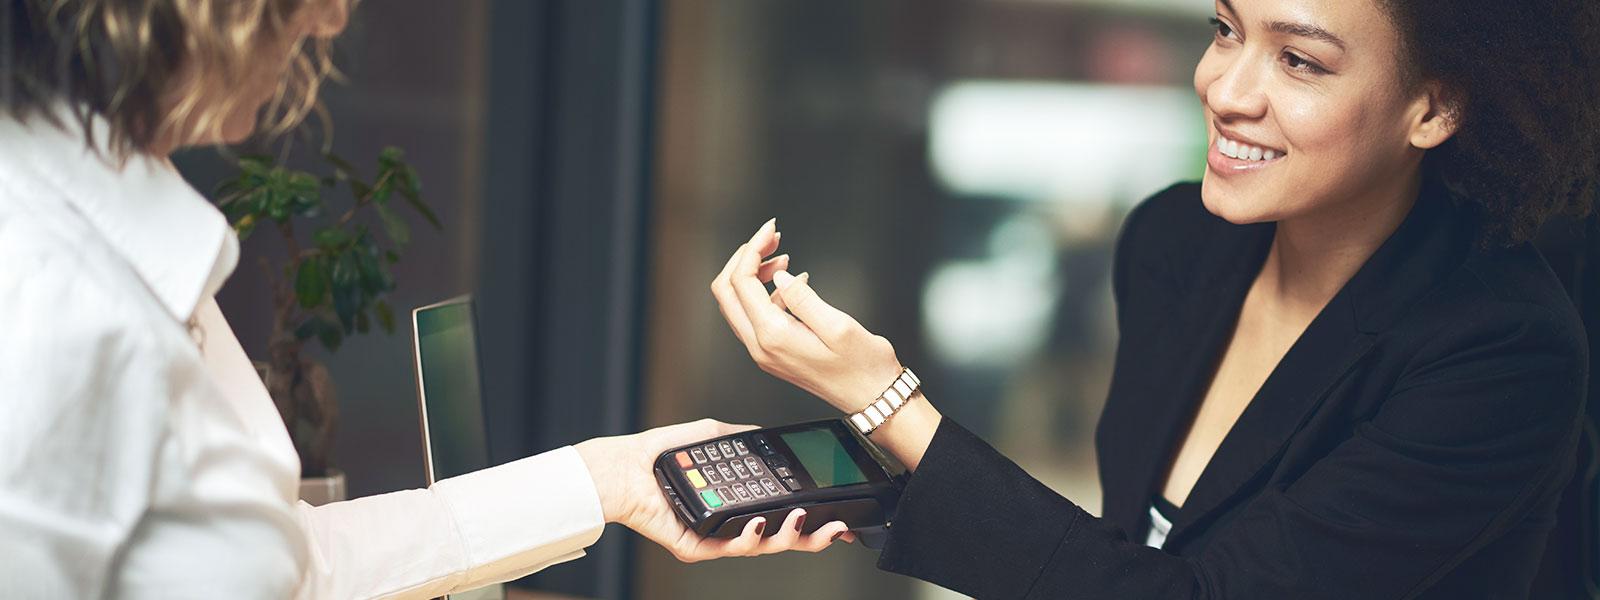 woman makes contactless payment with wearable payment technology (wristband) 